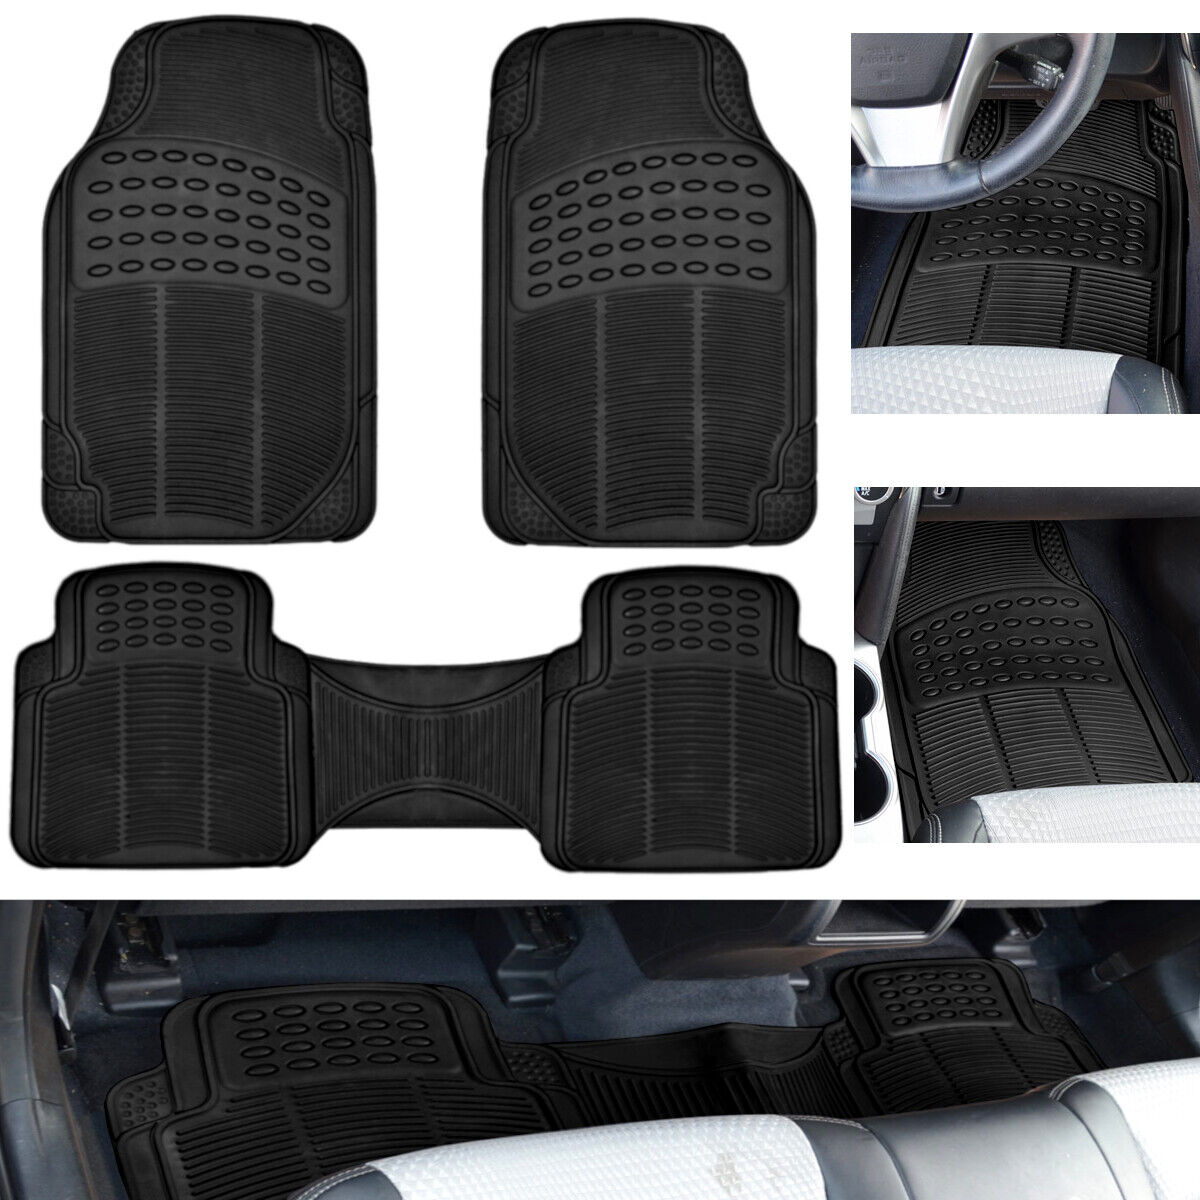 Auto Floor Mats for Car SUV Van All Weather 3 Piece Set Rubber Liners